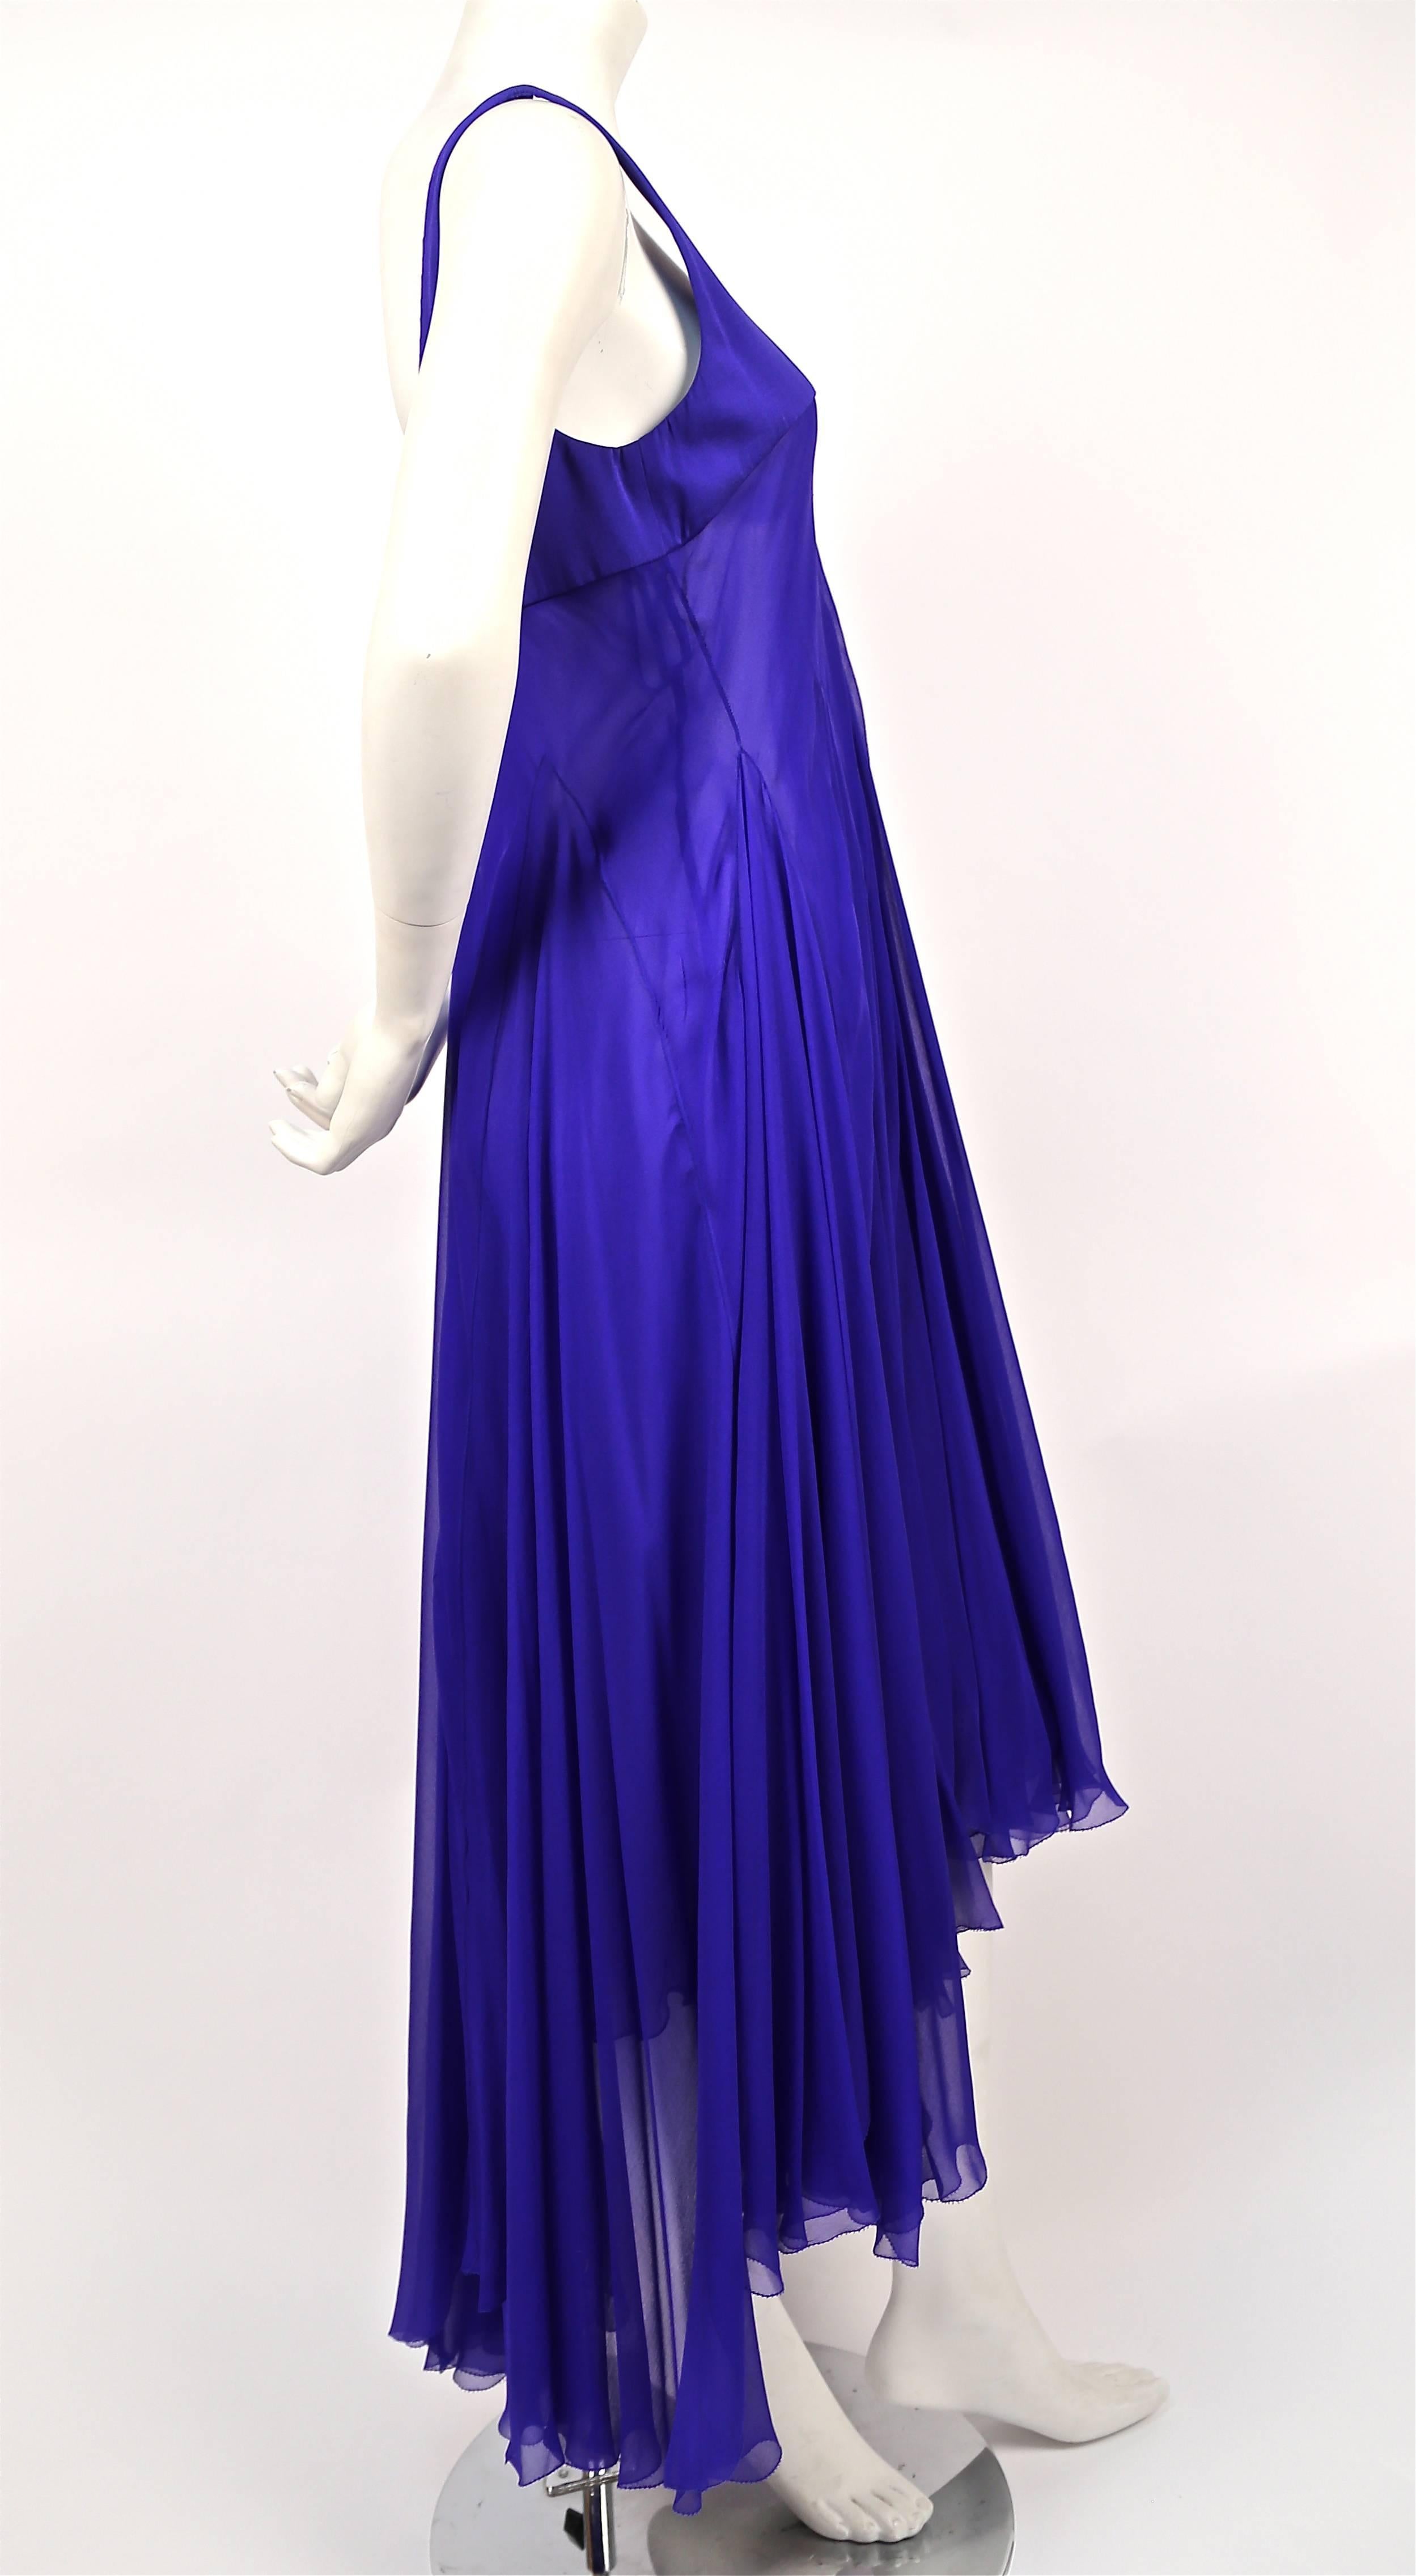 Vivid cobalt blue asymmetrically seamed silk chiffon gown from Alexander McQueen dating to c. 2006. Italian size 44, however this dress runs small due to the bias cut and would best fit a US 4 or 6. Approximate measurements: bust 34", waist